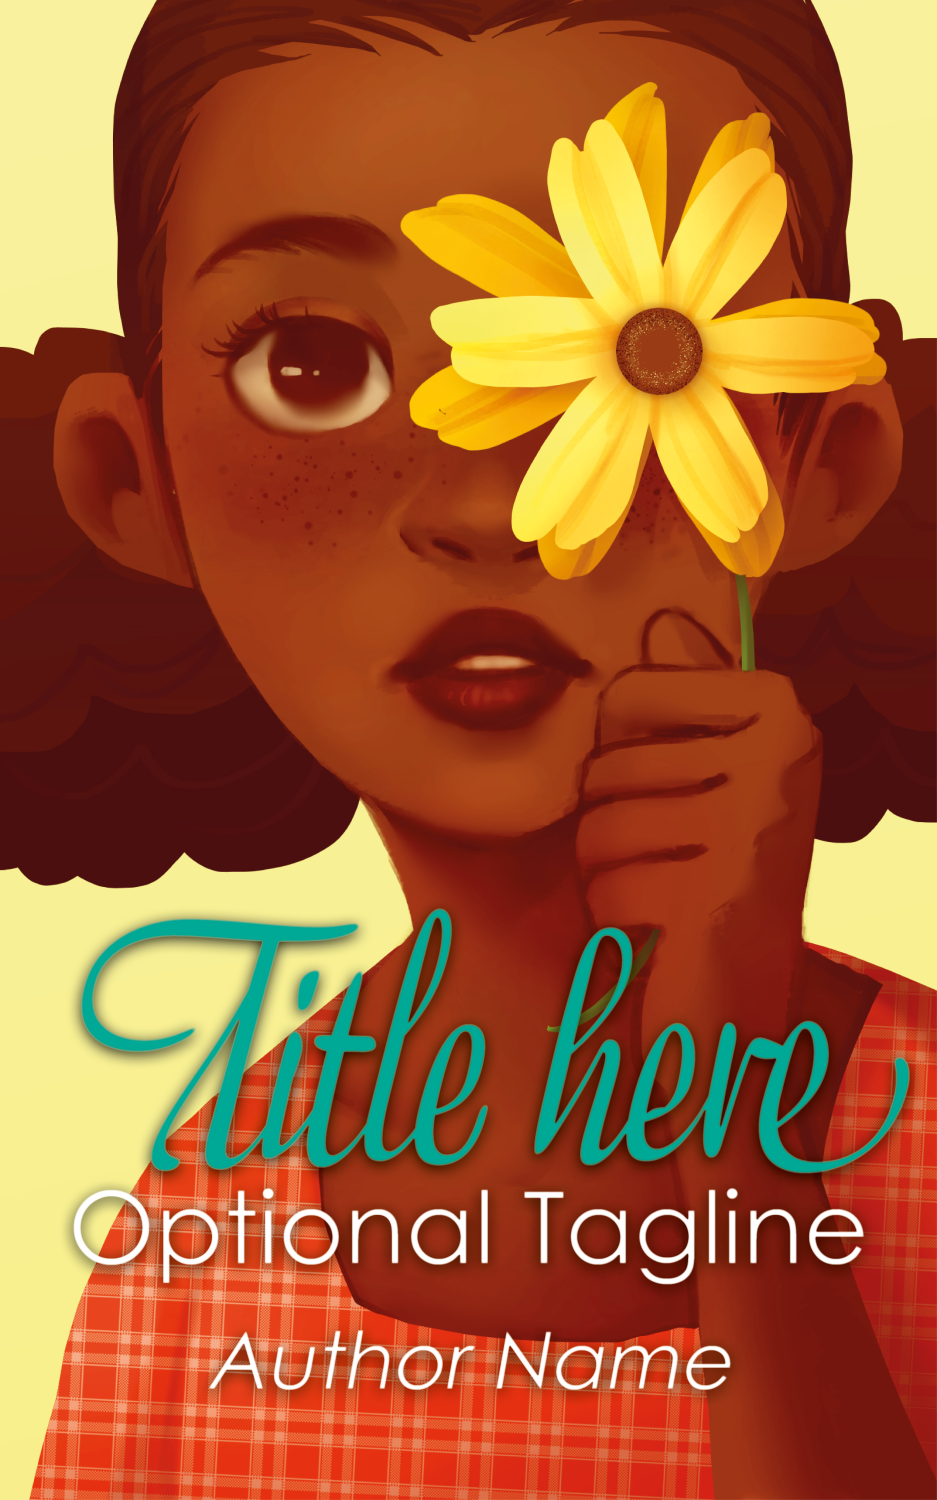 Child Holding A Daisy Middle Grade Book Cover The Book Cover Designer